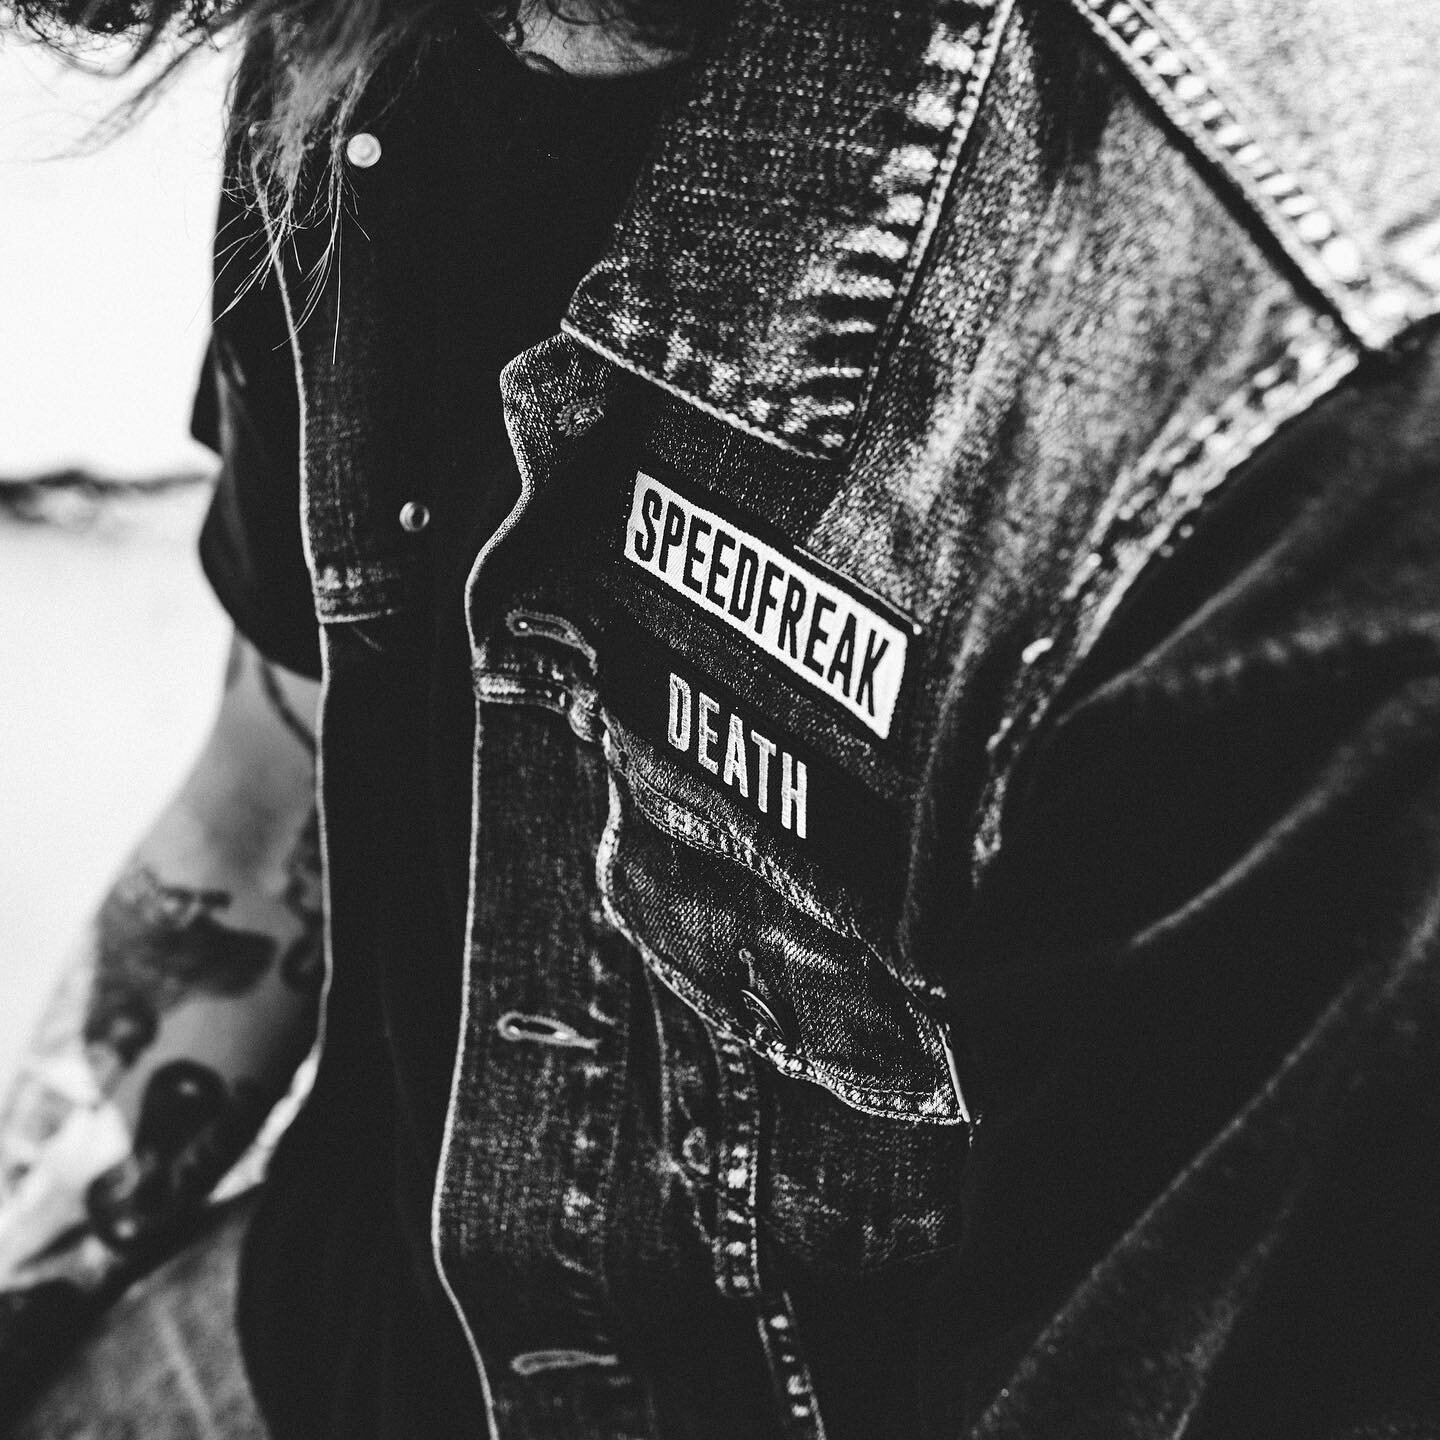 SPEEDFREAK X DEATH
The 4x1&rdquo; pocket-rockers will fit perfectly across your denim trims, cuffs and collars. Stack &lsquo;em high, stack &lsquo;em wide.
@swahili__bob 
@billyzammit 
#deathpatches